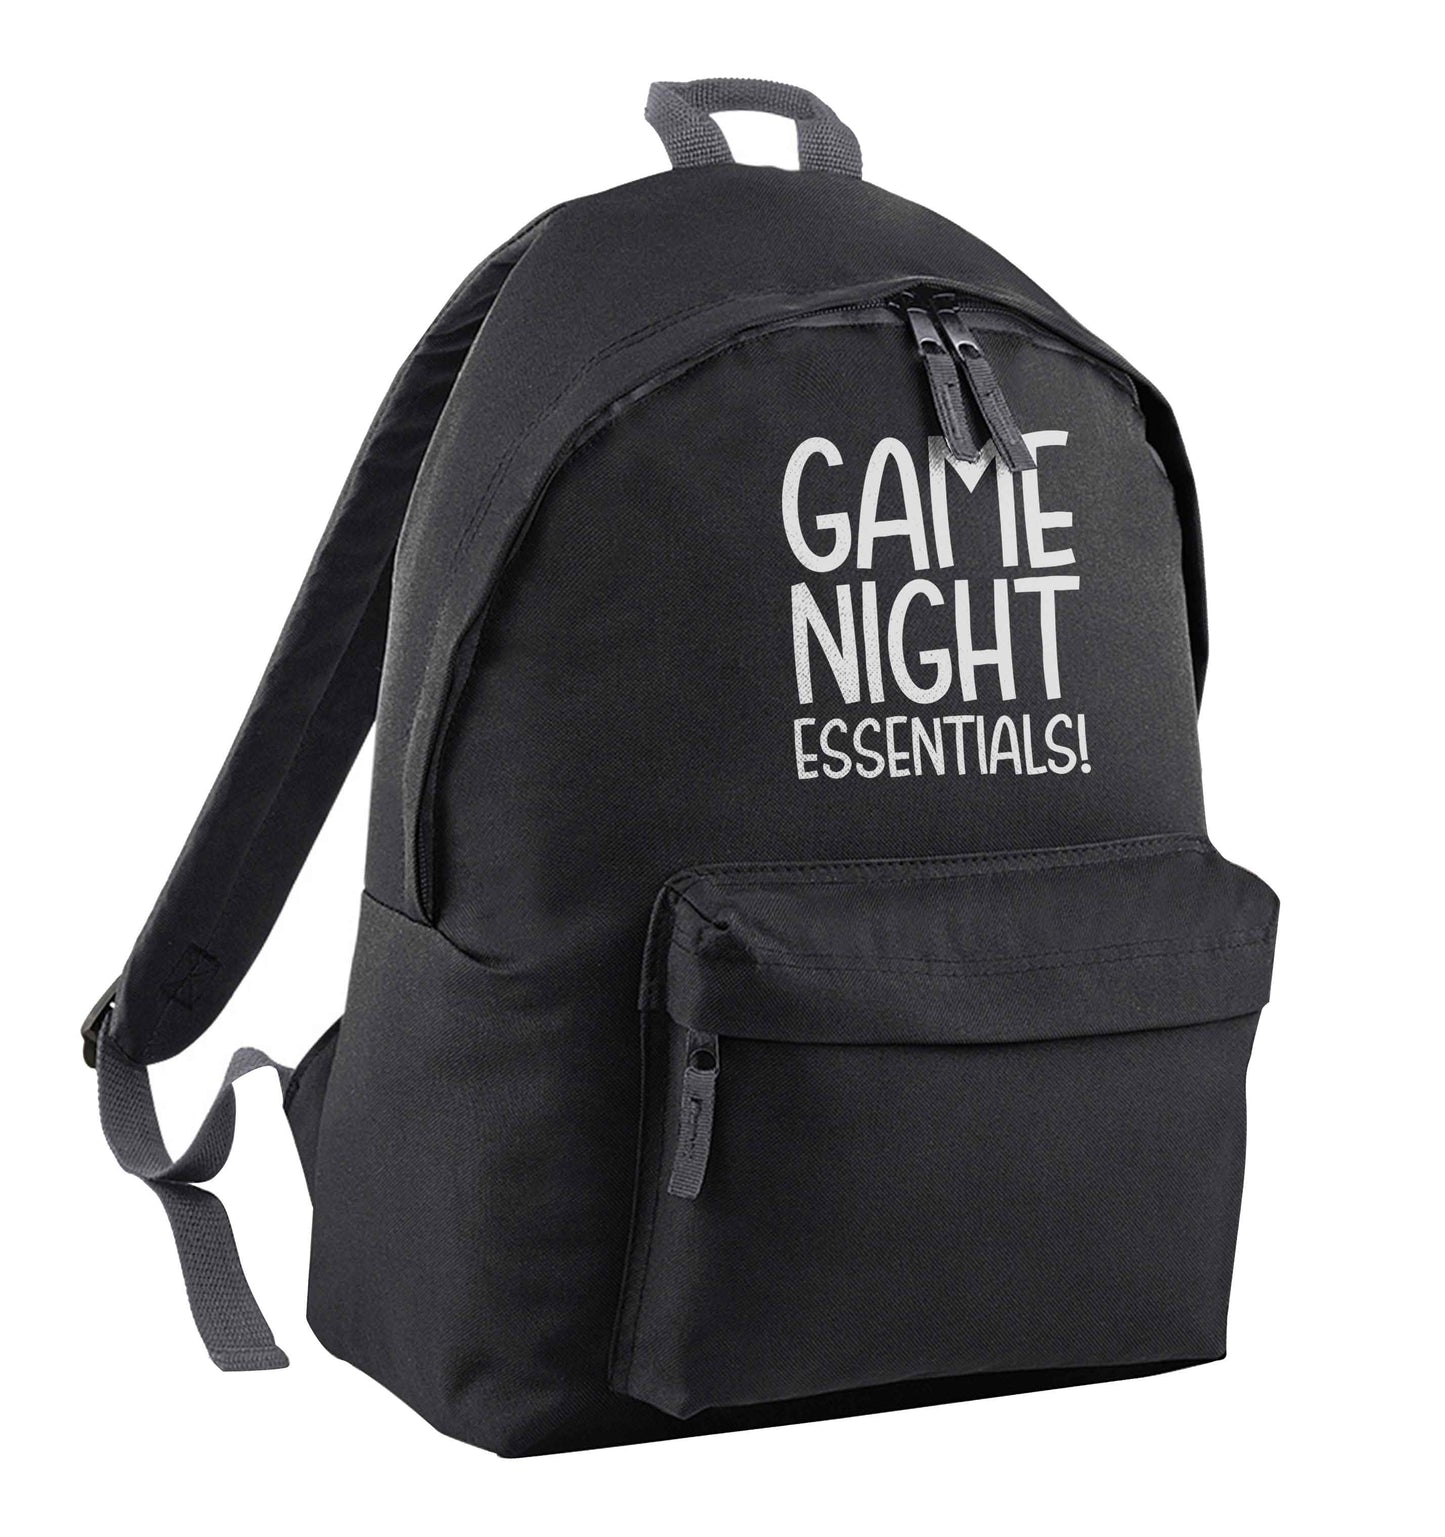 Game night essentials black adults backpack